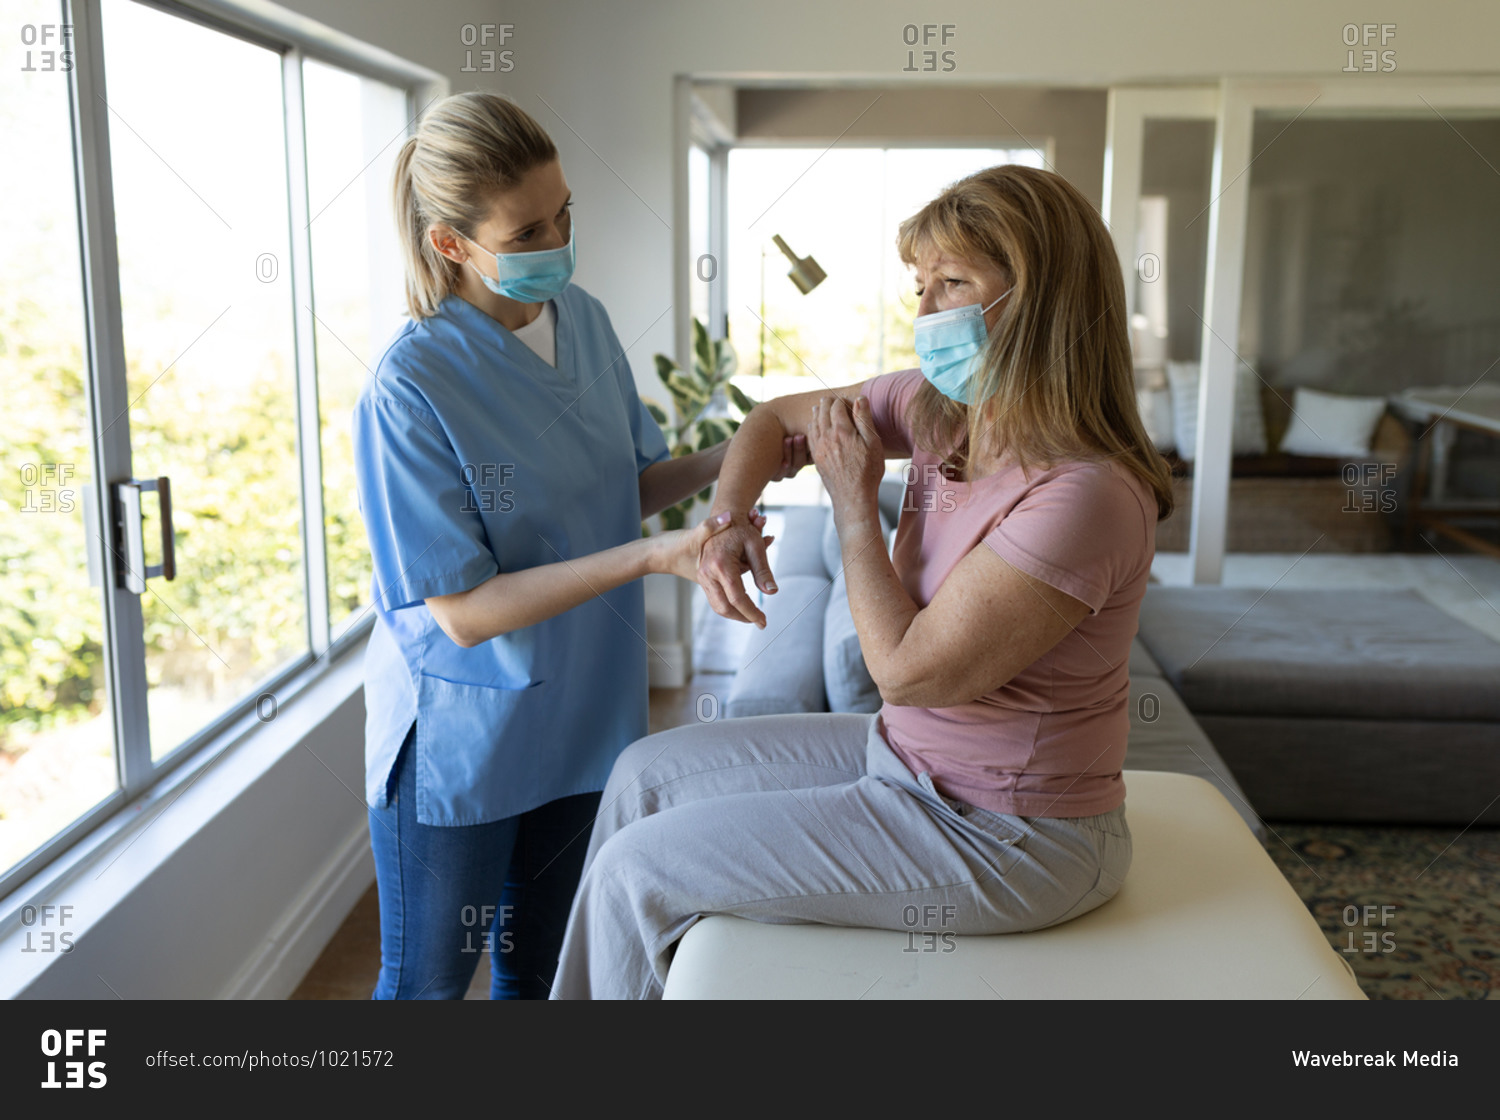 Senior Caucasian woman at home visited by Caucasian female nurse, stretching her arm, wearing face masks. Medical care at home during Covid 19 Coronavirus quarantine.